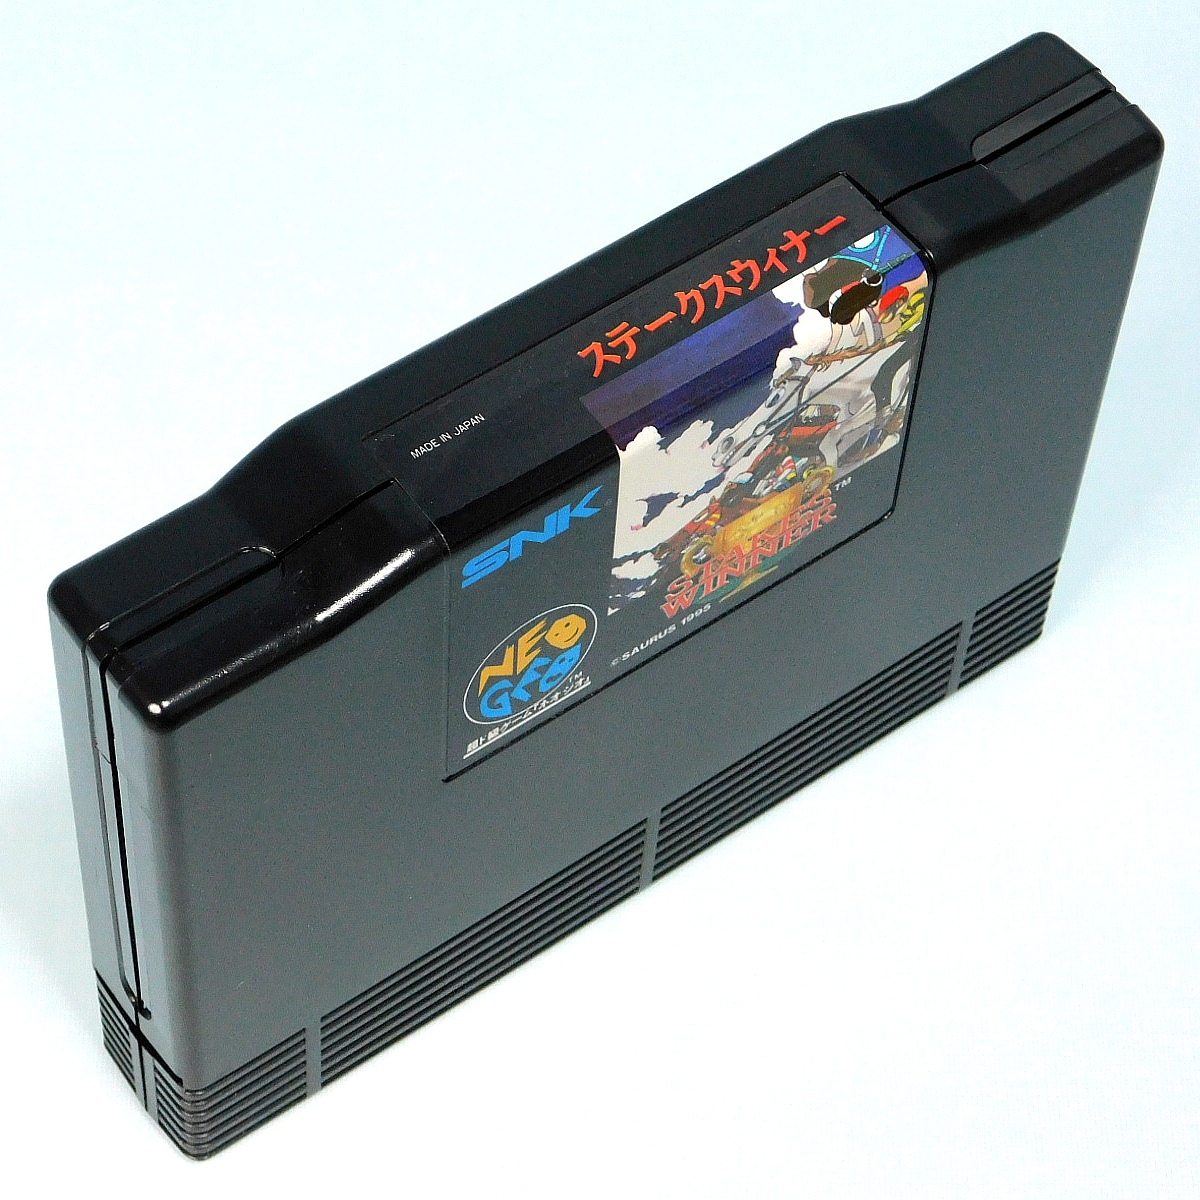  excellent Neo geo ROM cassette stay kswina- box opinion attaching domestic regular goods 